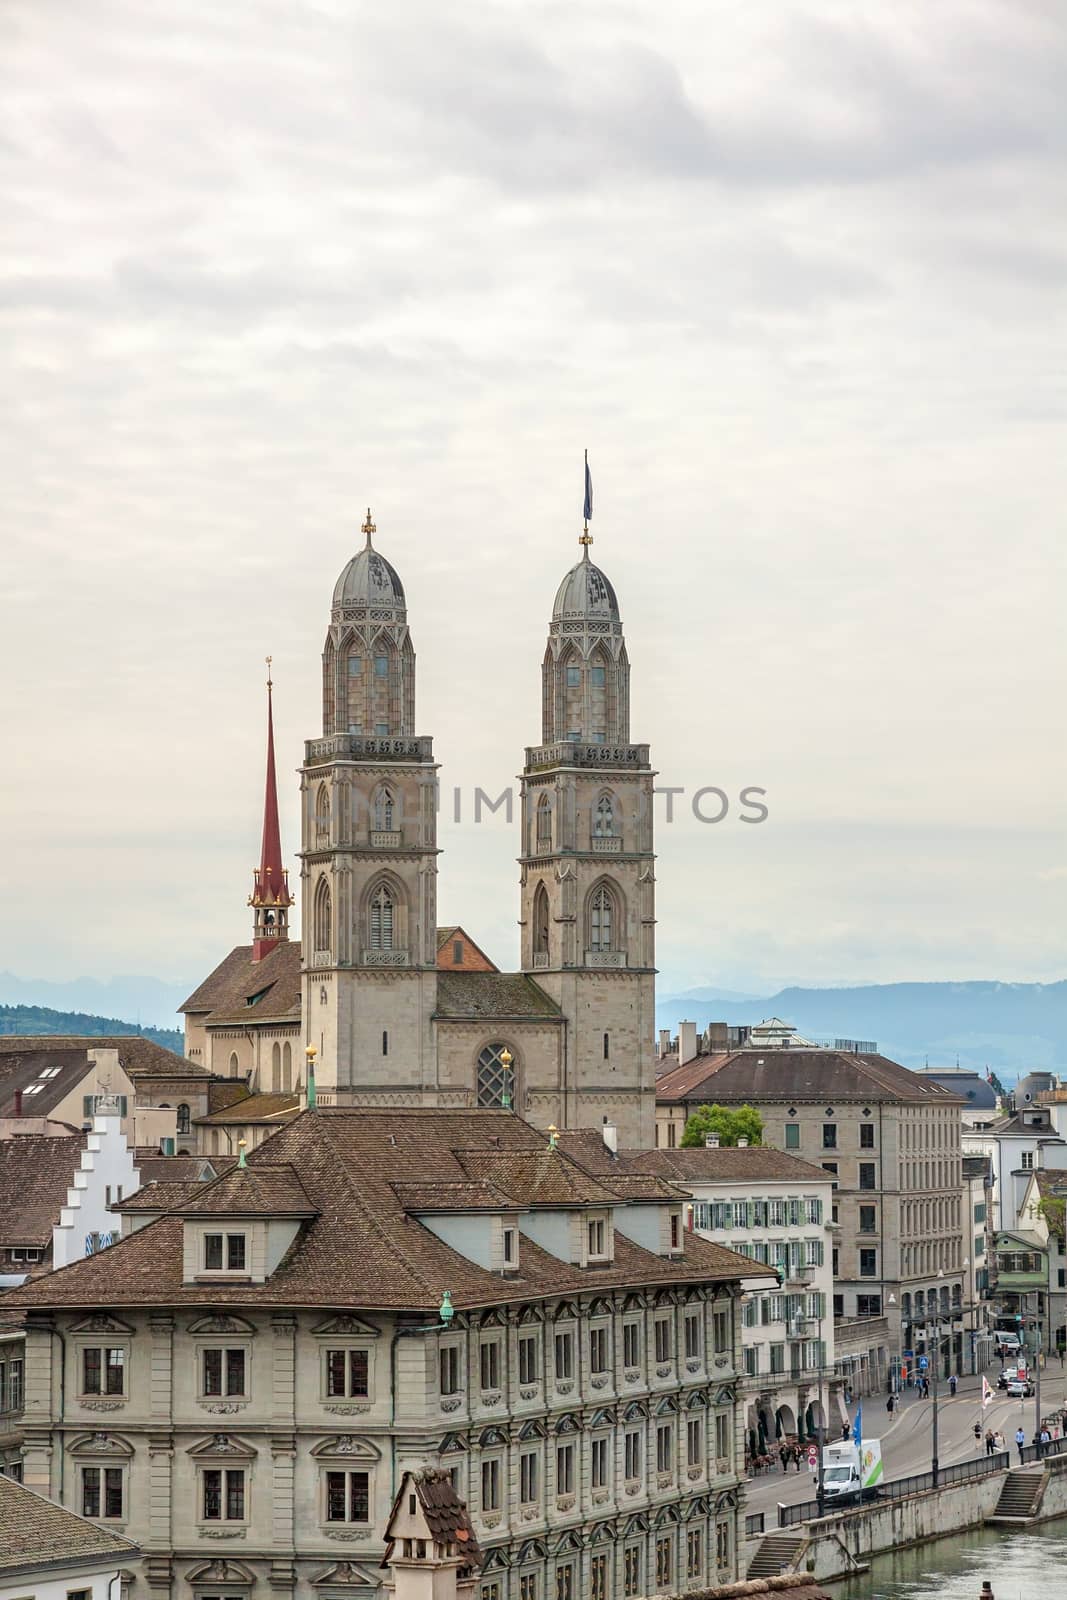 Zurich, Switzerland - June 10, 2017: The Grossmunster with town hall in front. It is a Romanesque-style Protestant church in Zurich, Switzerland. View from park Lindenhof.